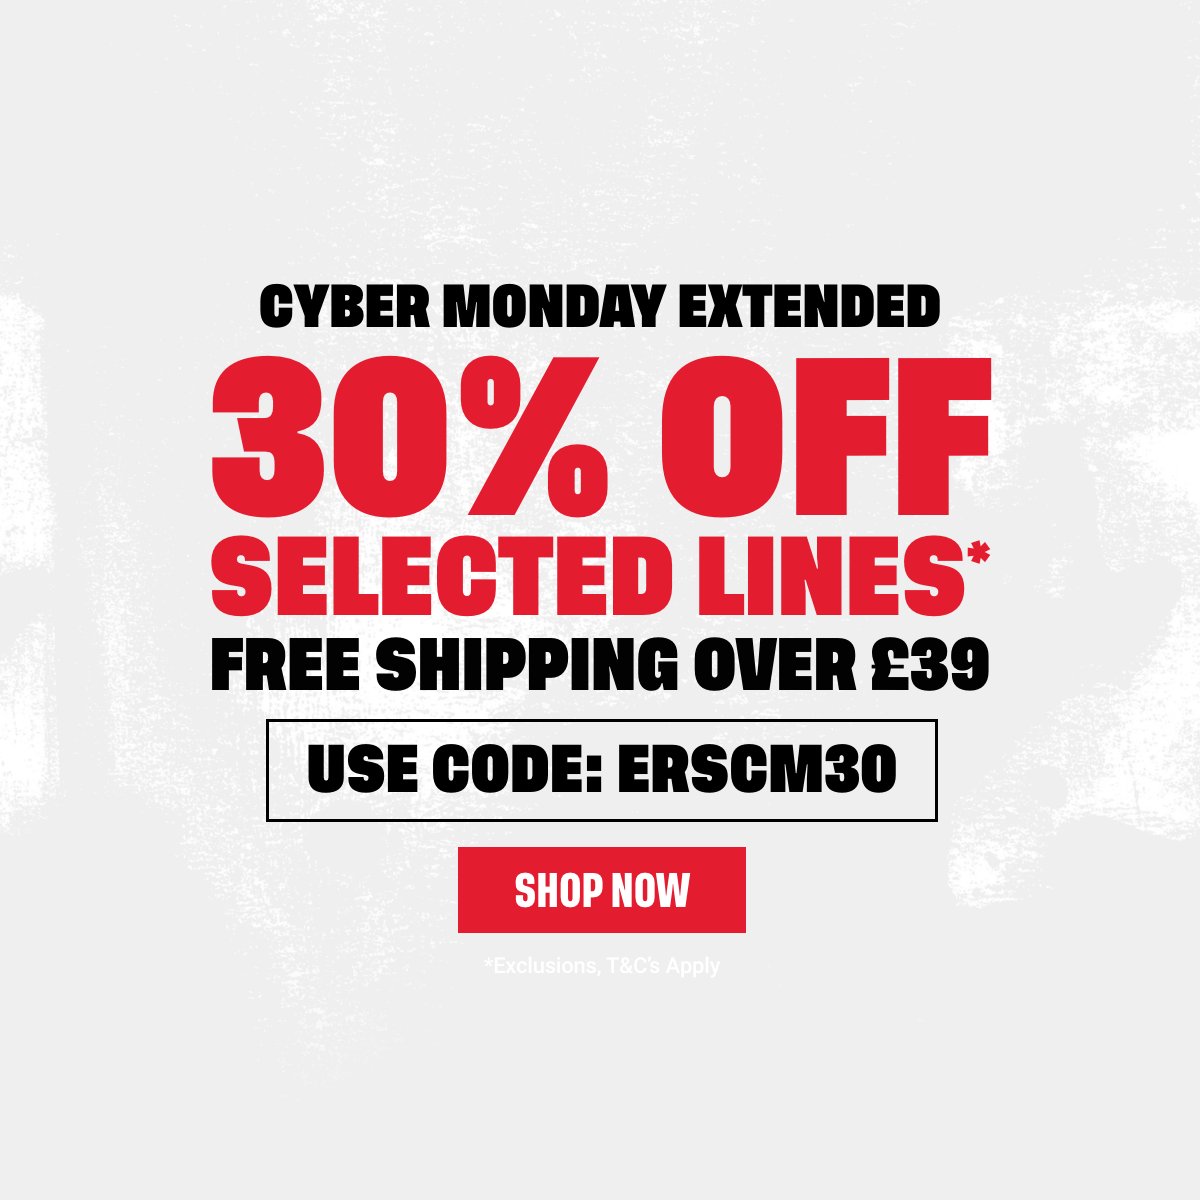 Cyber Monday has been extended! bit.ly/CyberExtendedER